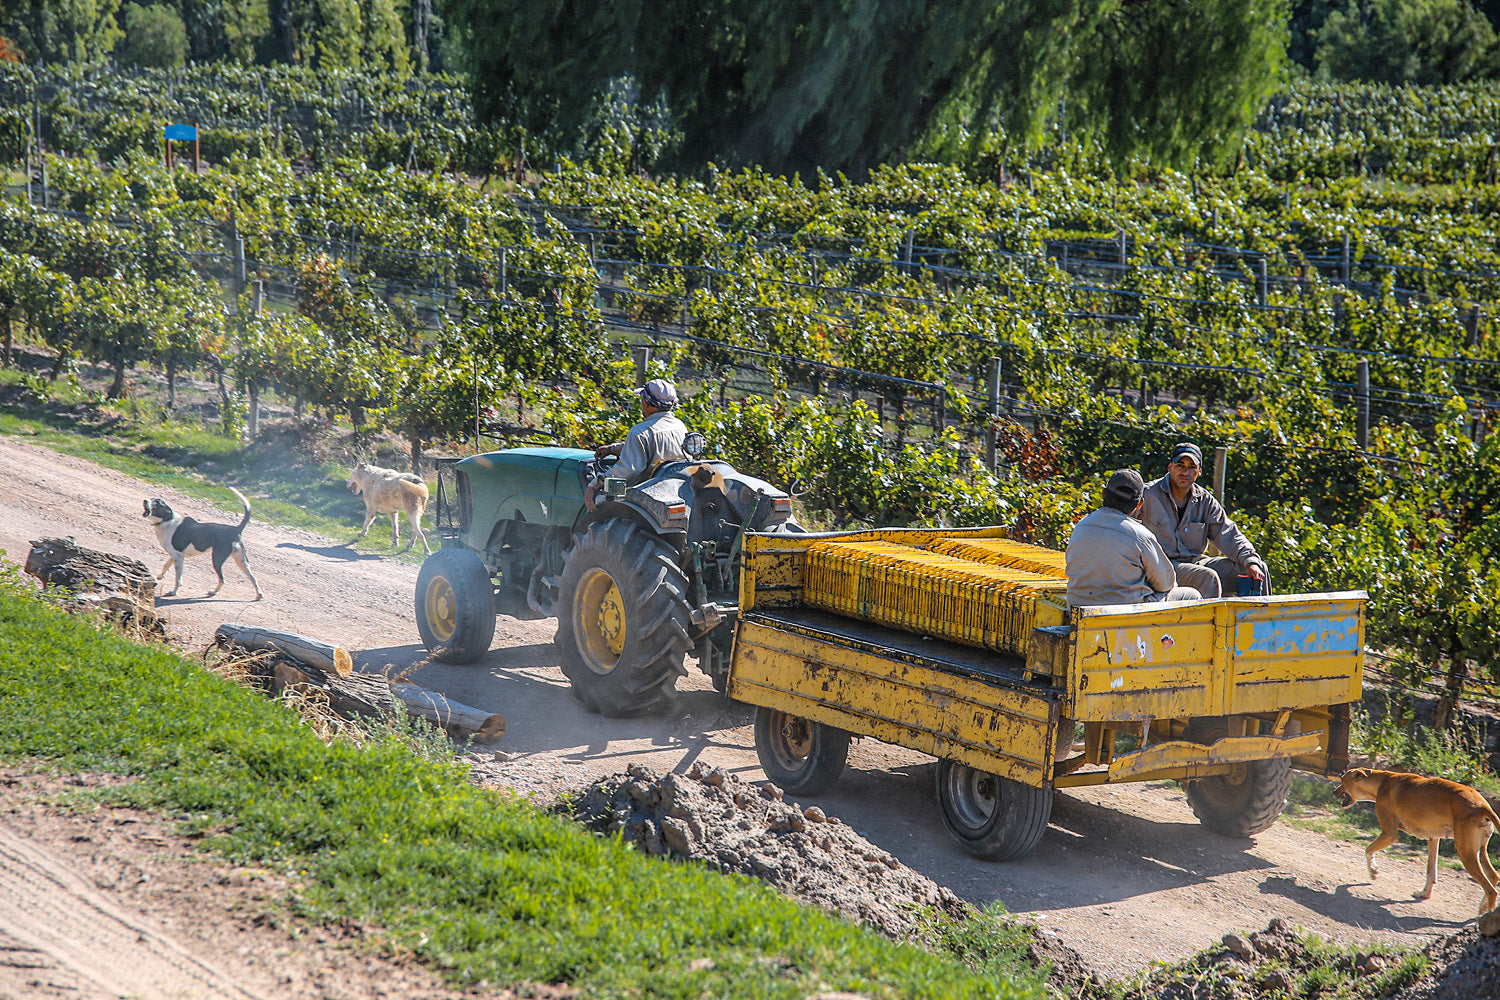 A tractor in the vineyard.